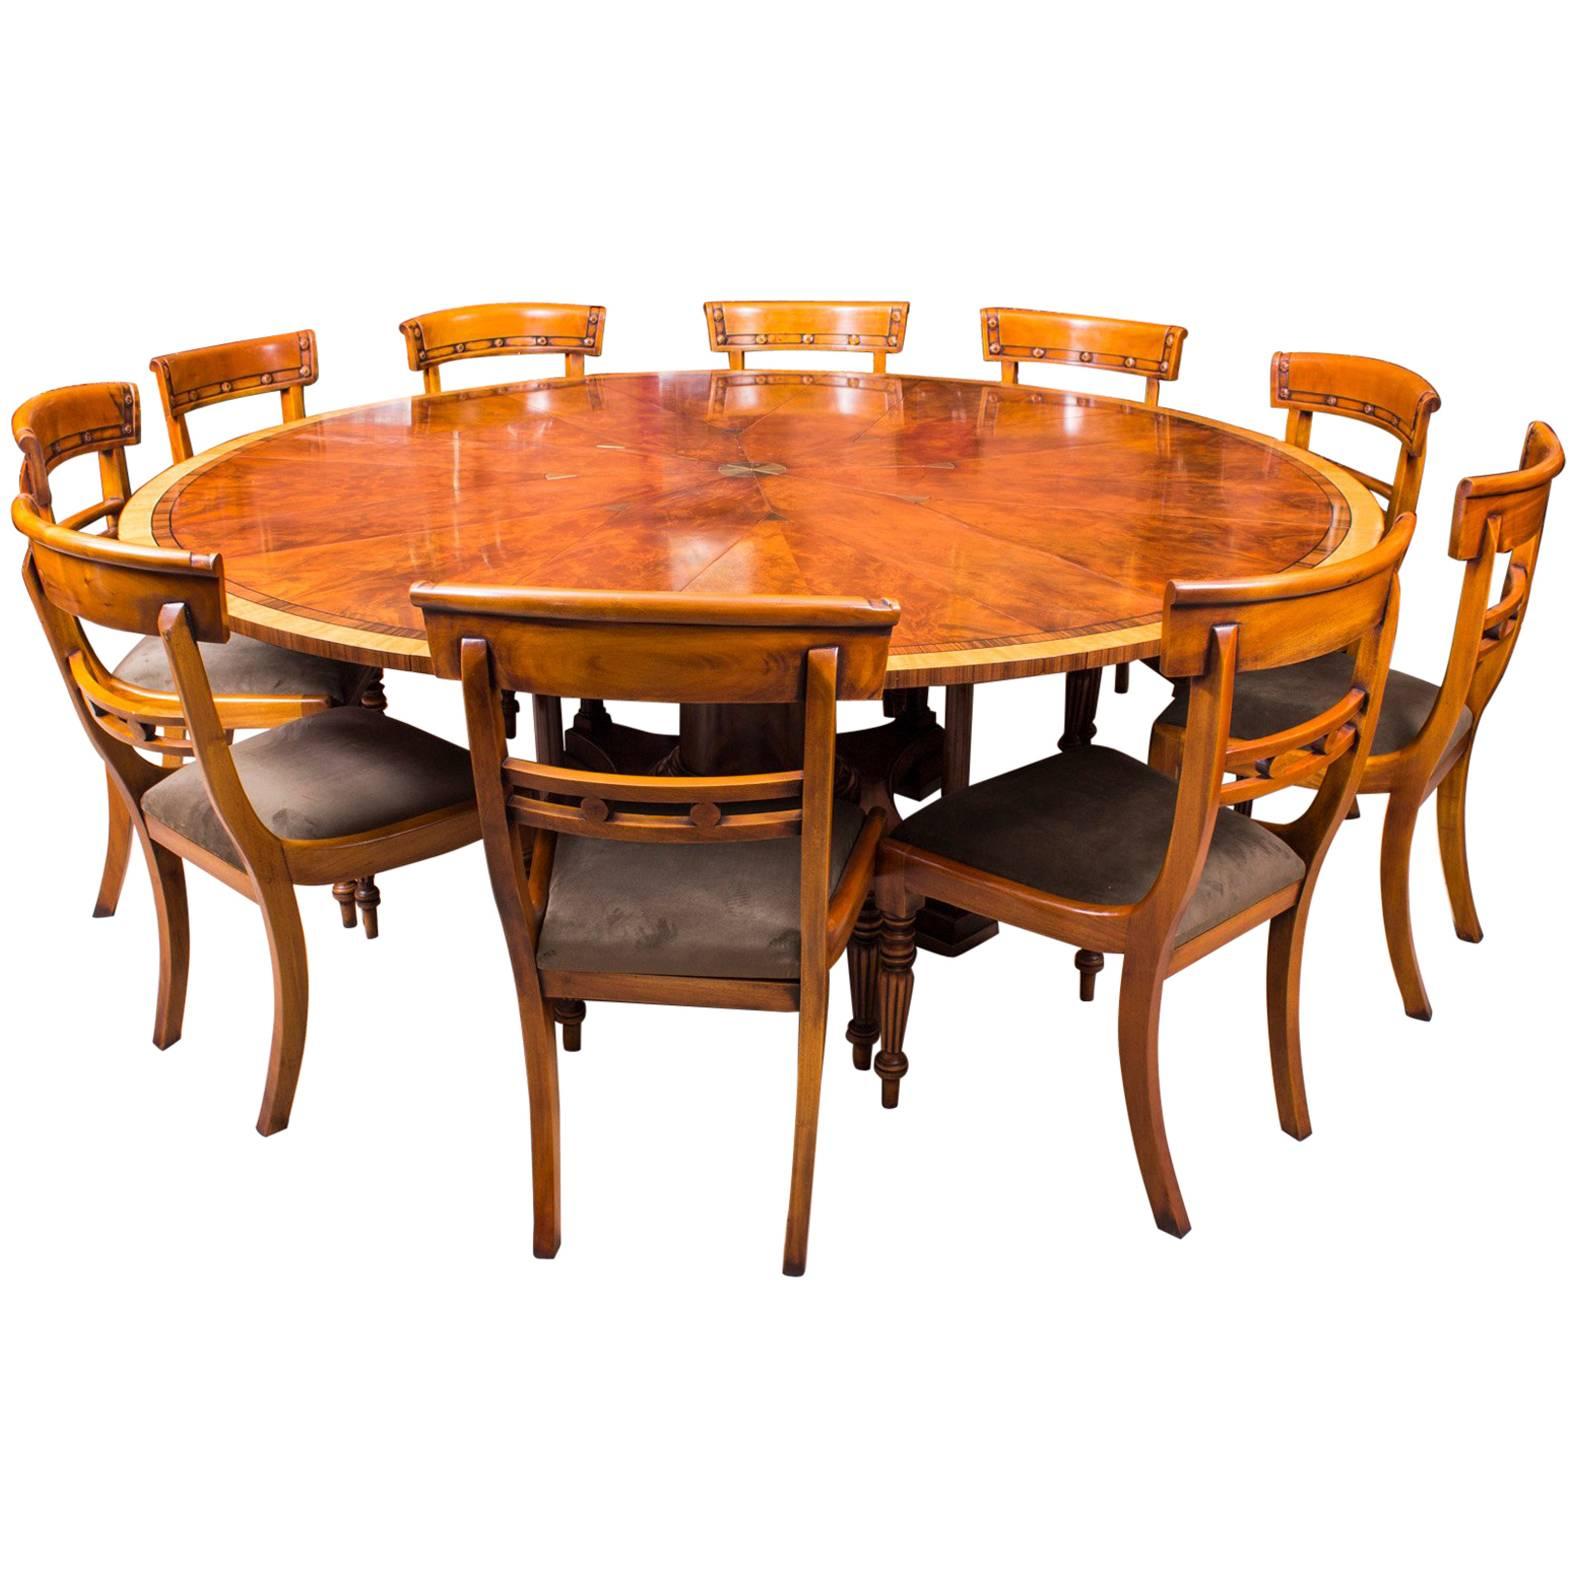 Theodore Alexander Flame Mahogany Jupe Dining Table and Ten Chairs